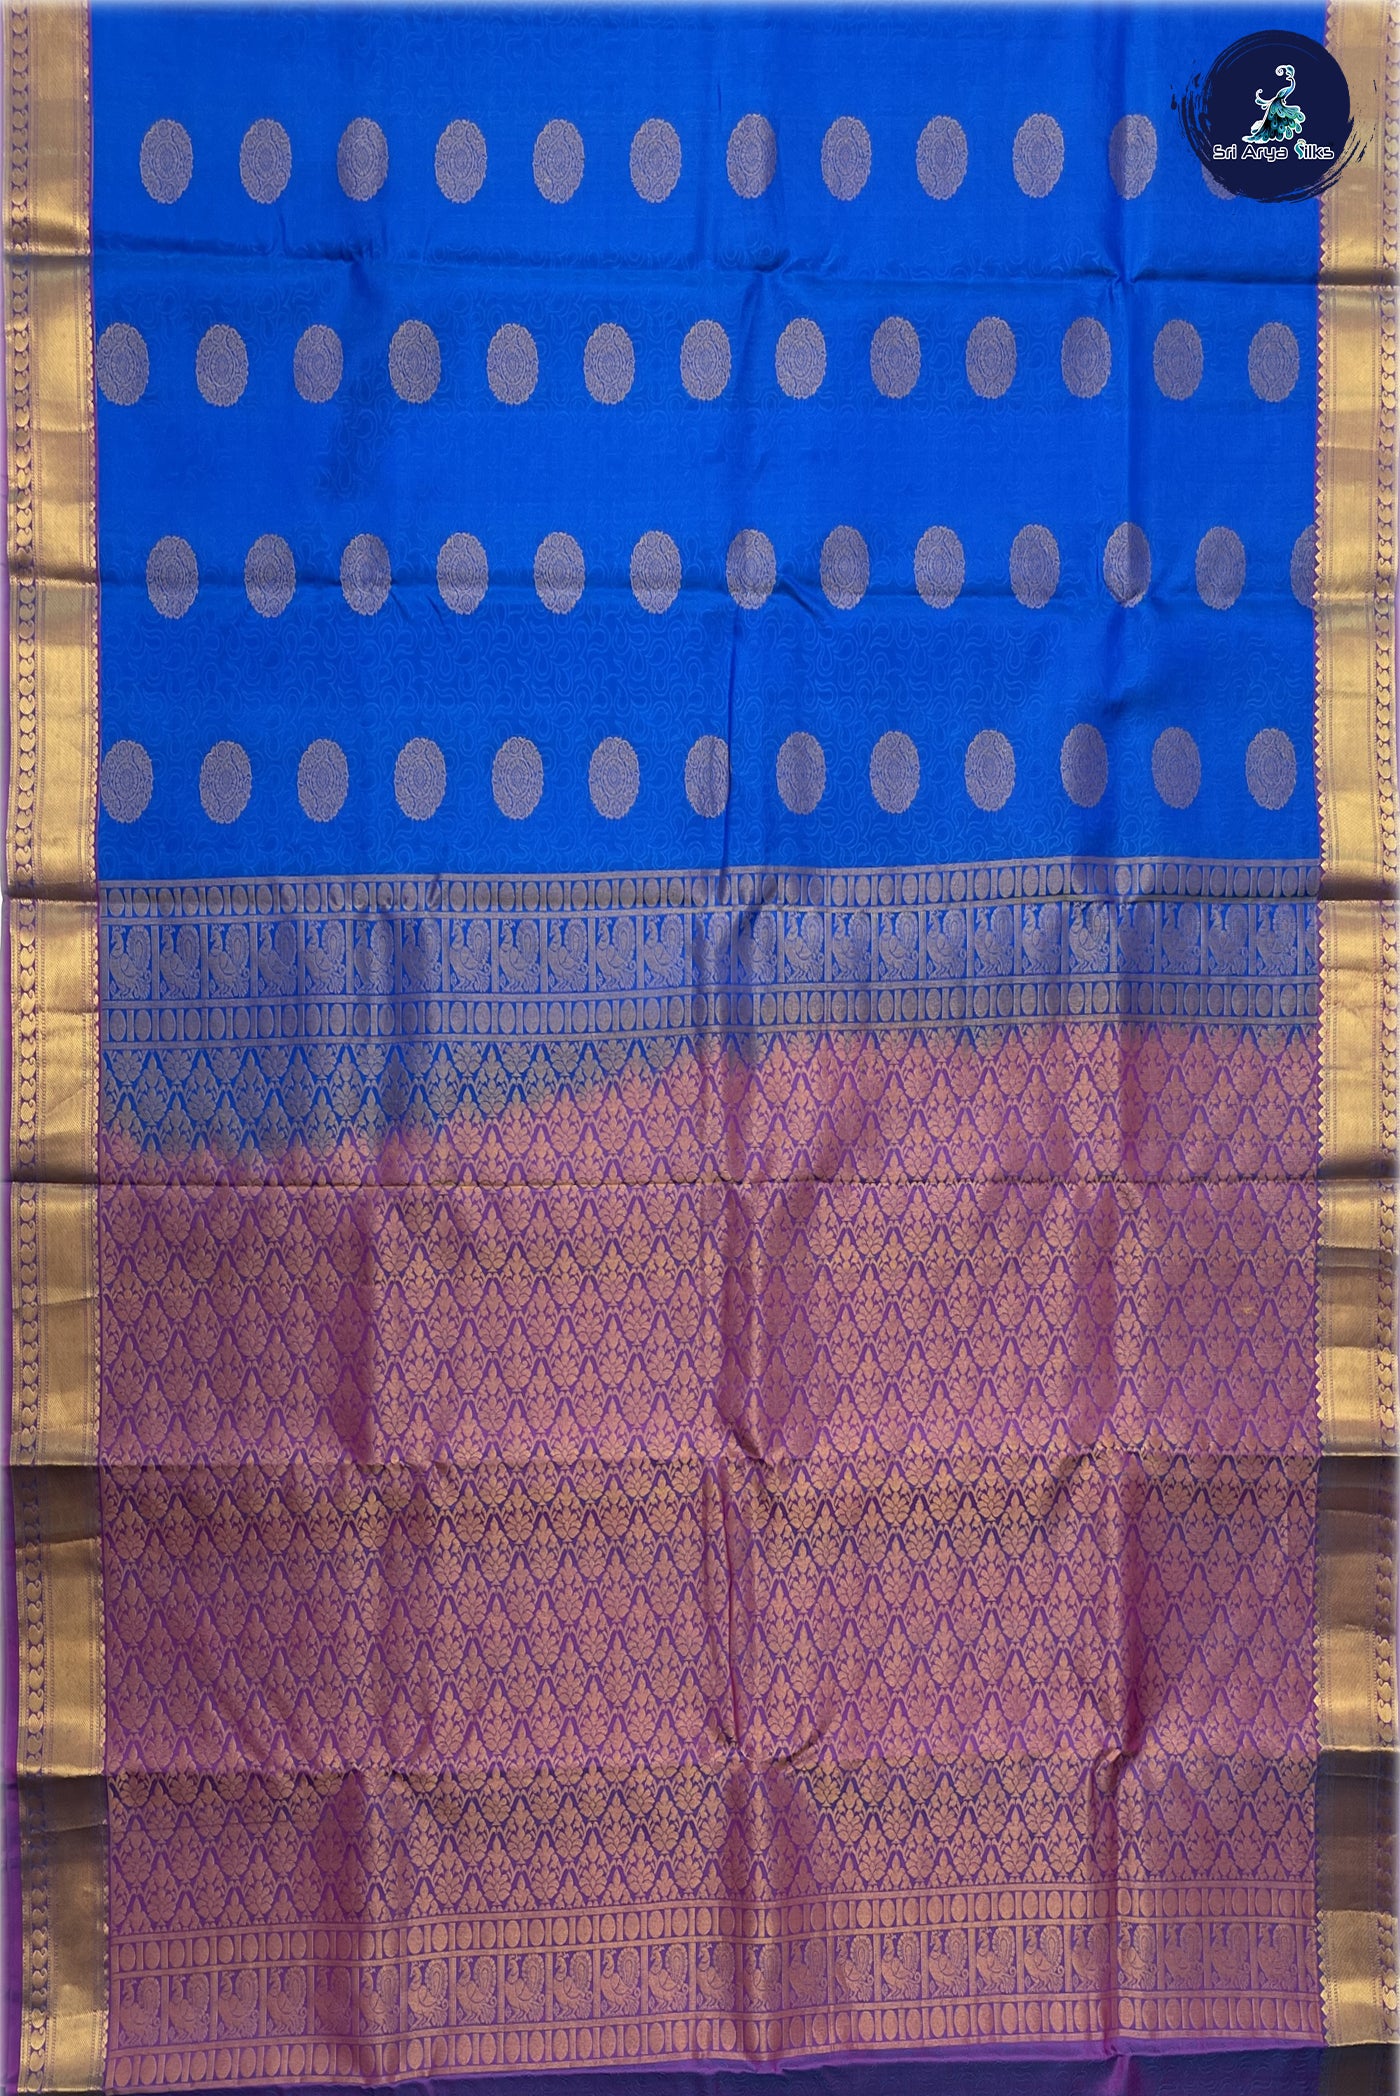 Blue Embosed Saree With Purple Blouse & Buttas Pattern